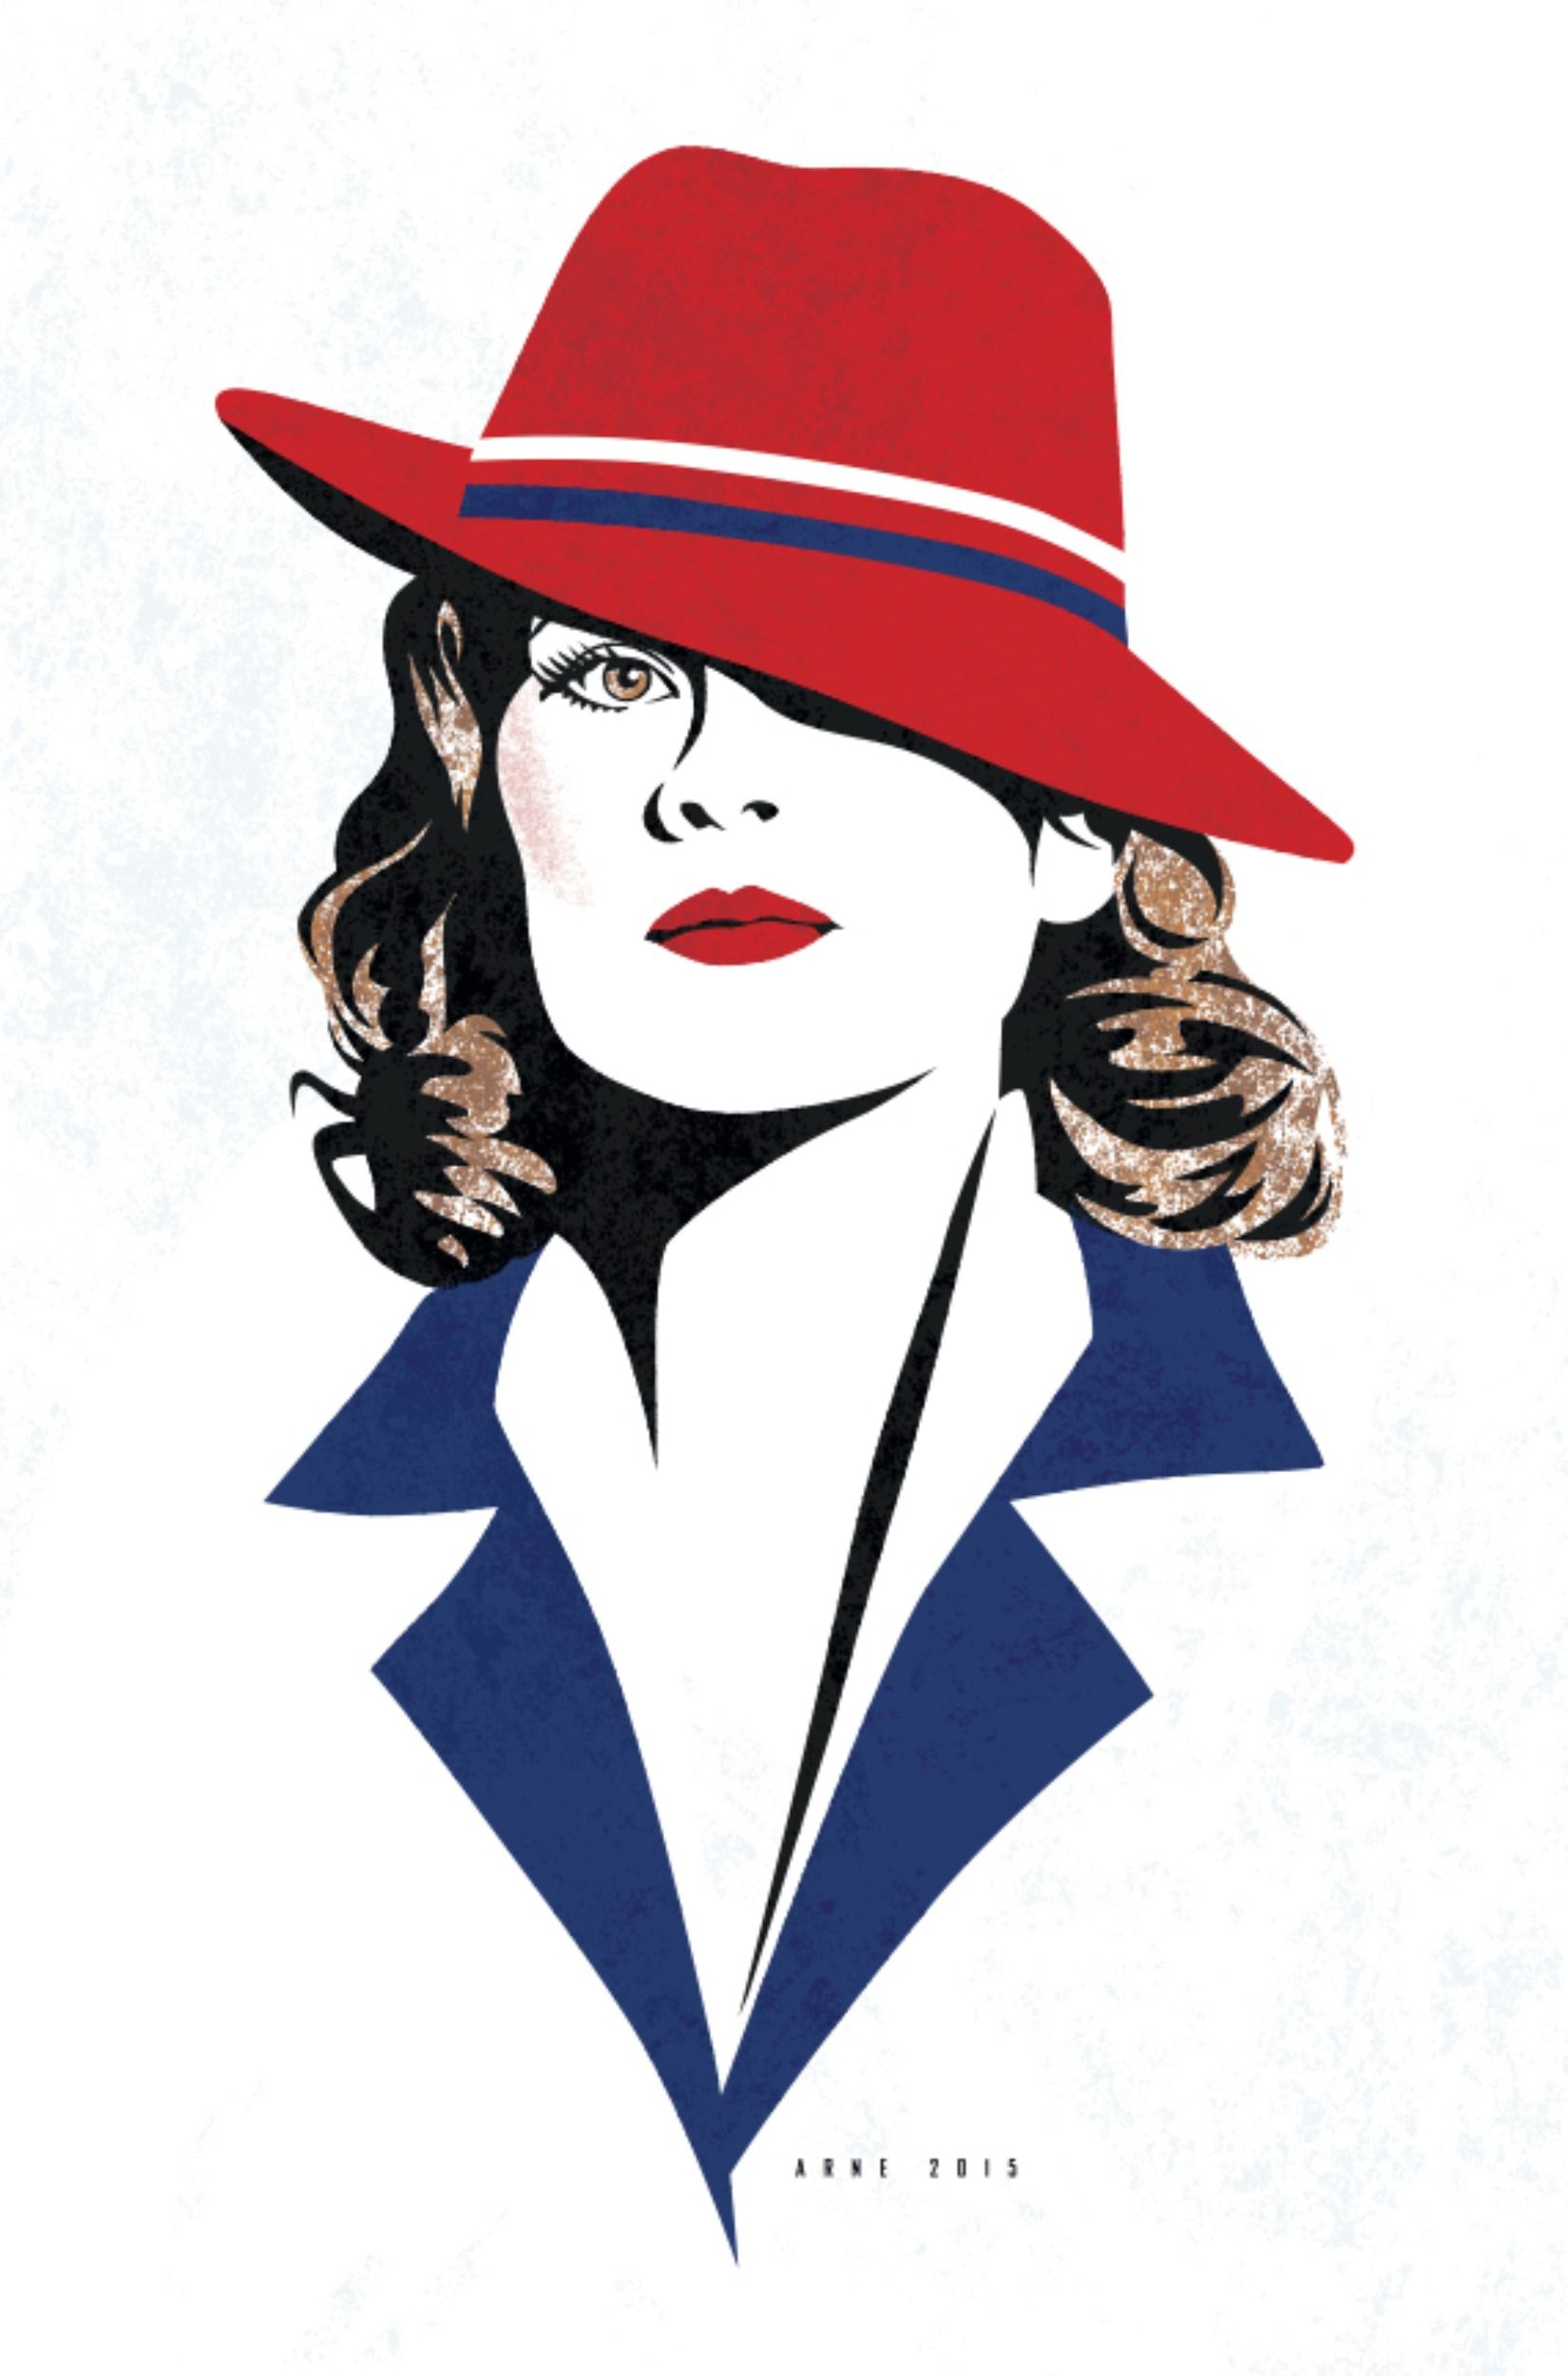 Marvels Agent Carter 10 Amazing Pieces Of Fan Art That Peggy Would Approve Of